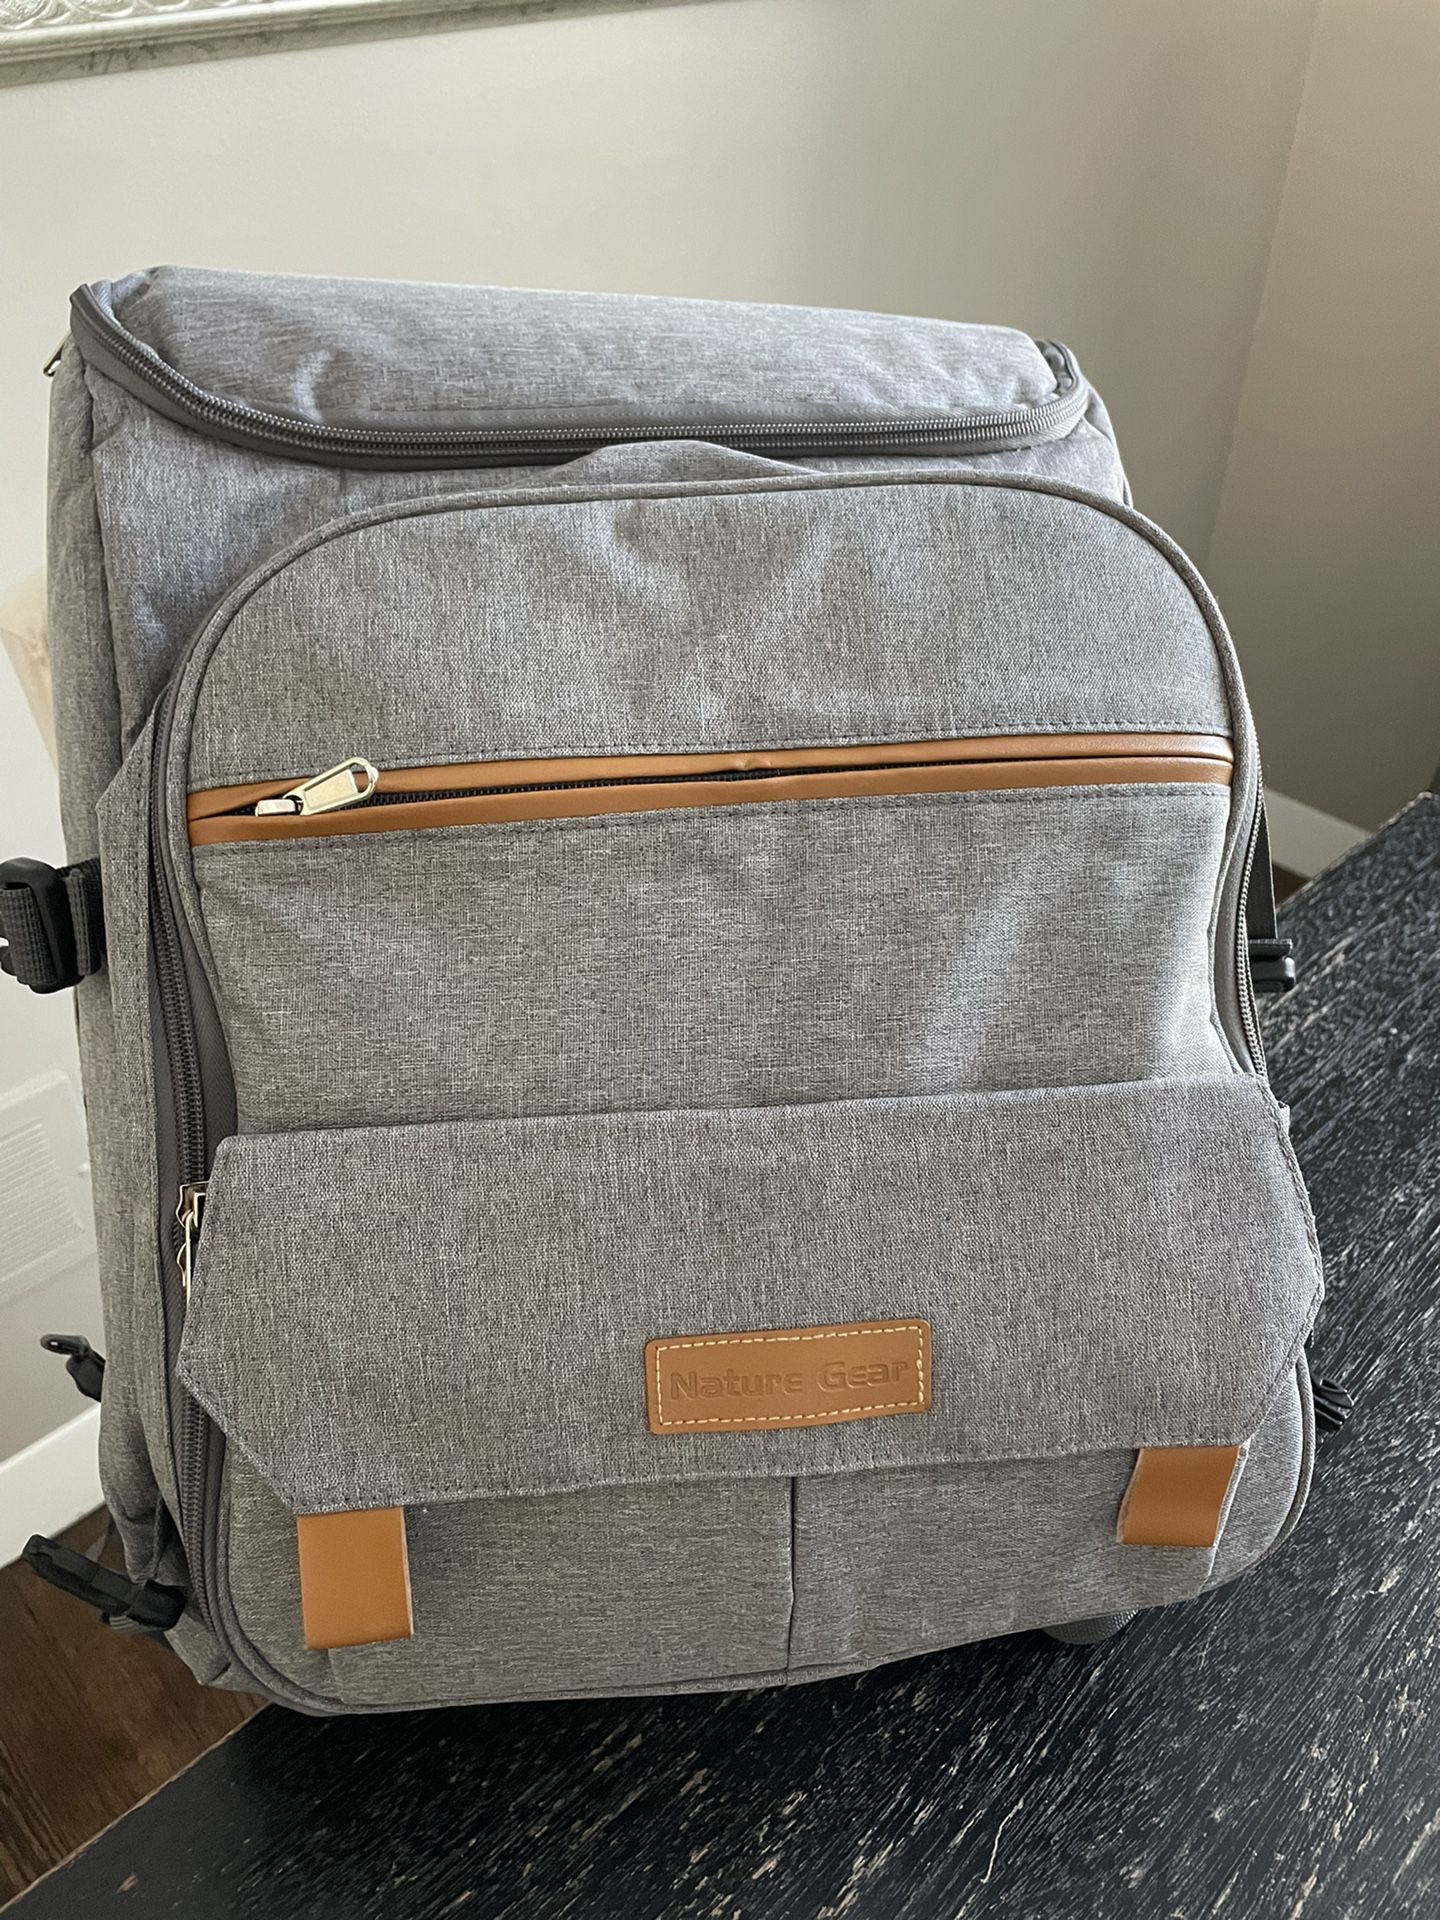 Picnic Backpack - Brand New